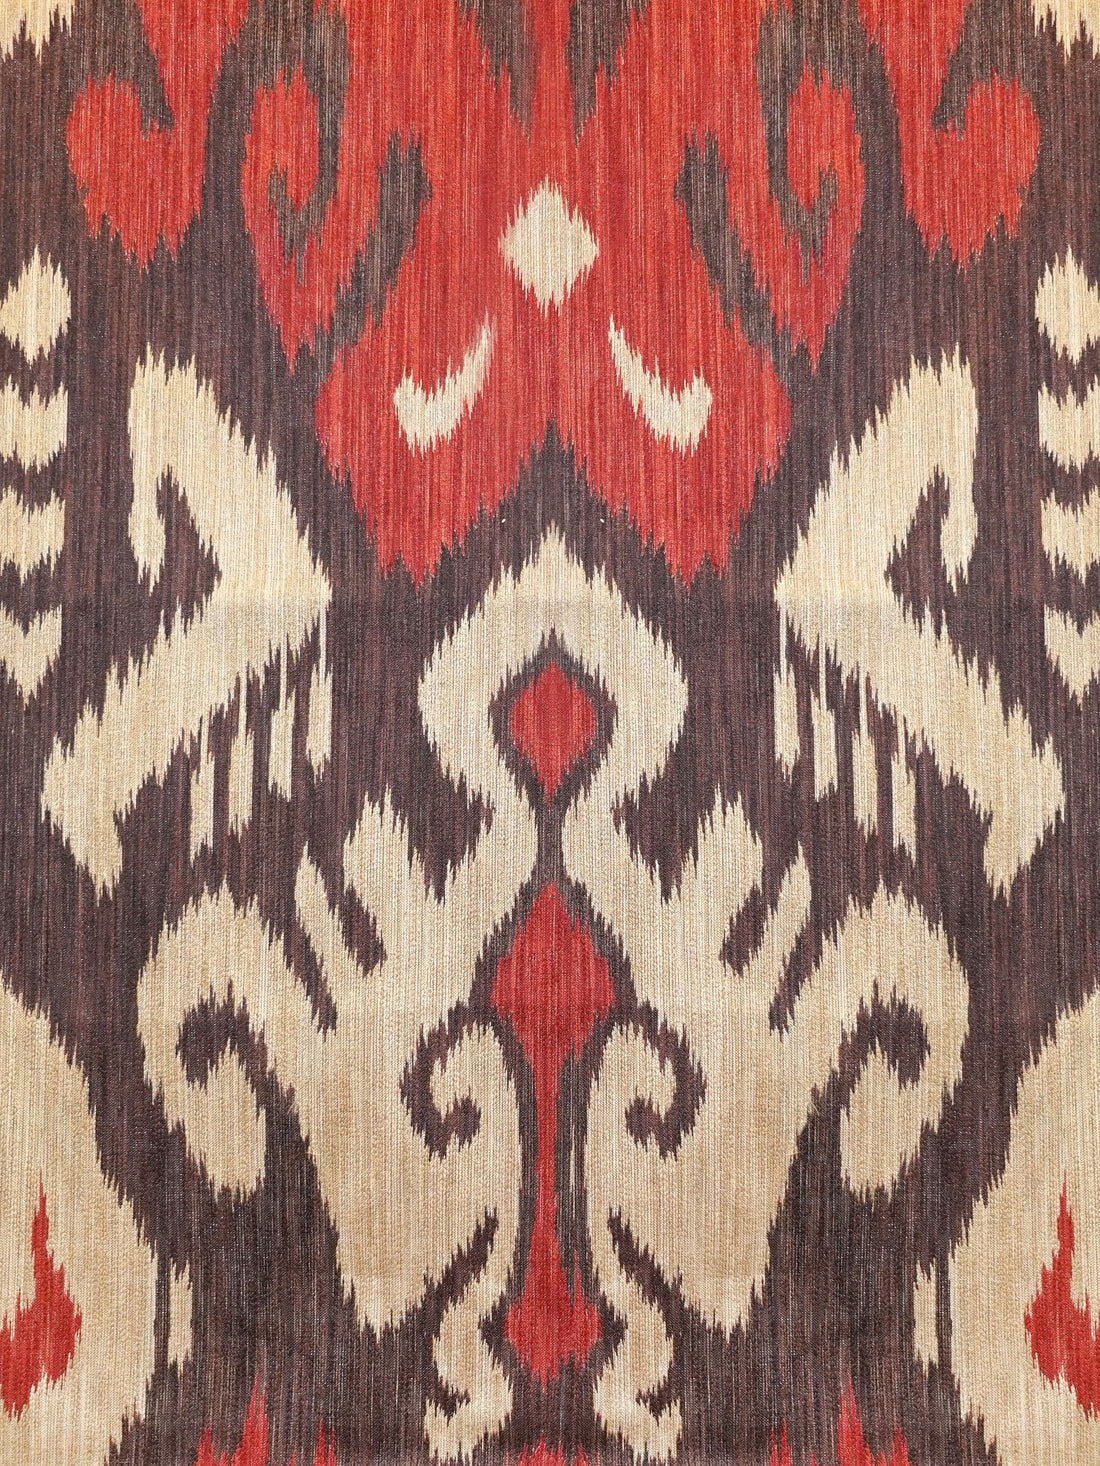 Isan Ikat fabric in mulberry color - pattern number TX 0001T200 - by Scalamandre in the Old World Weavers collection